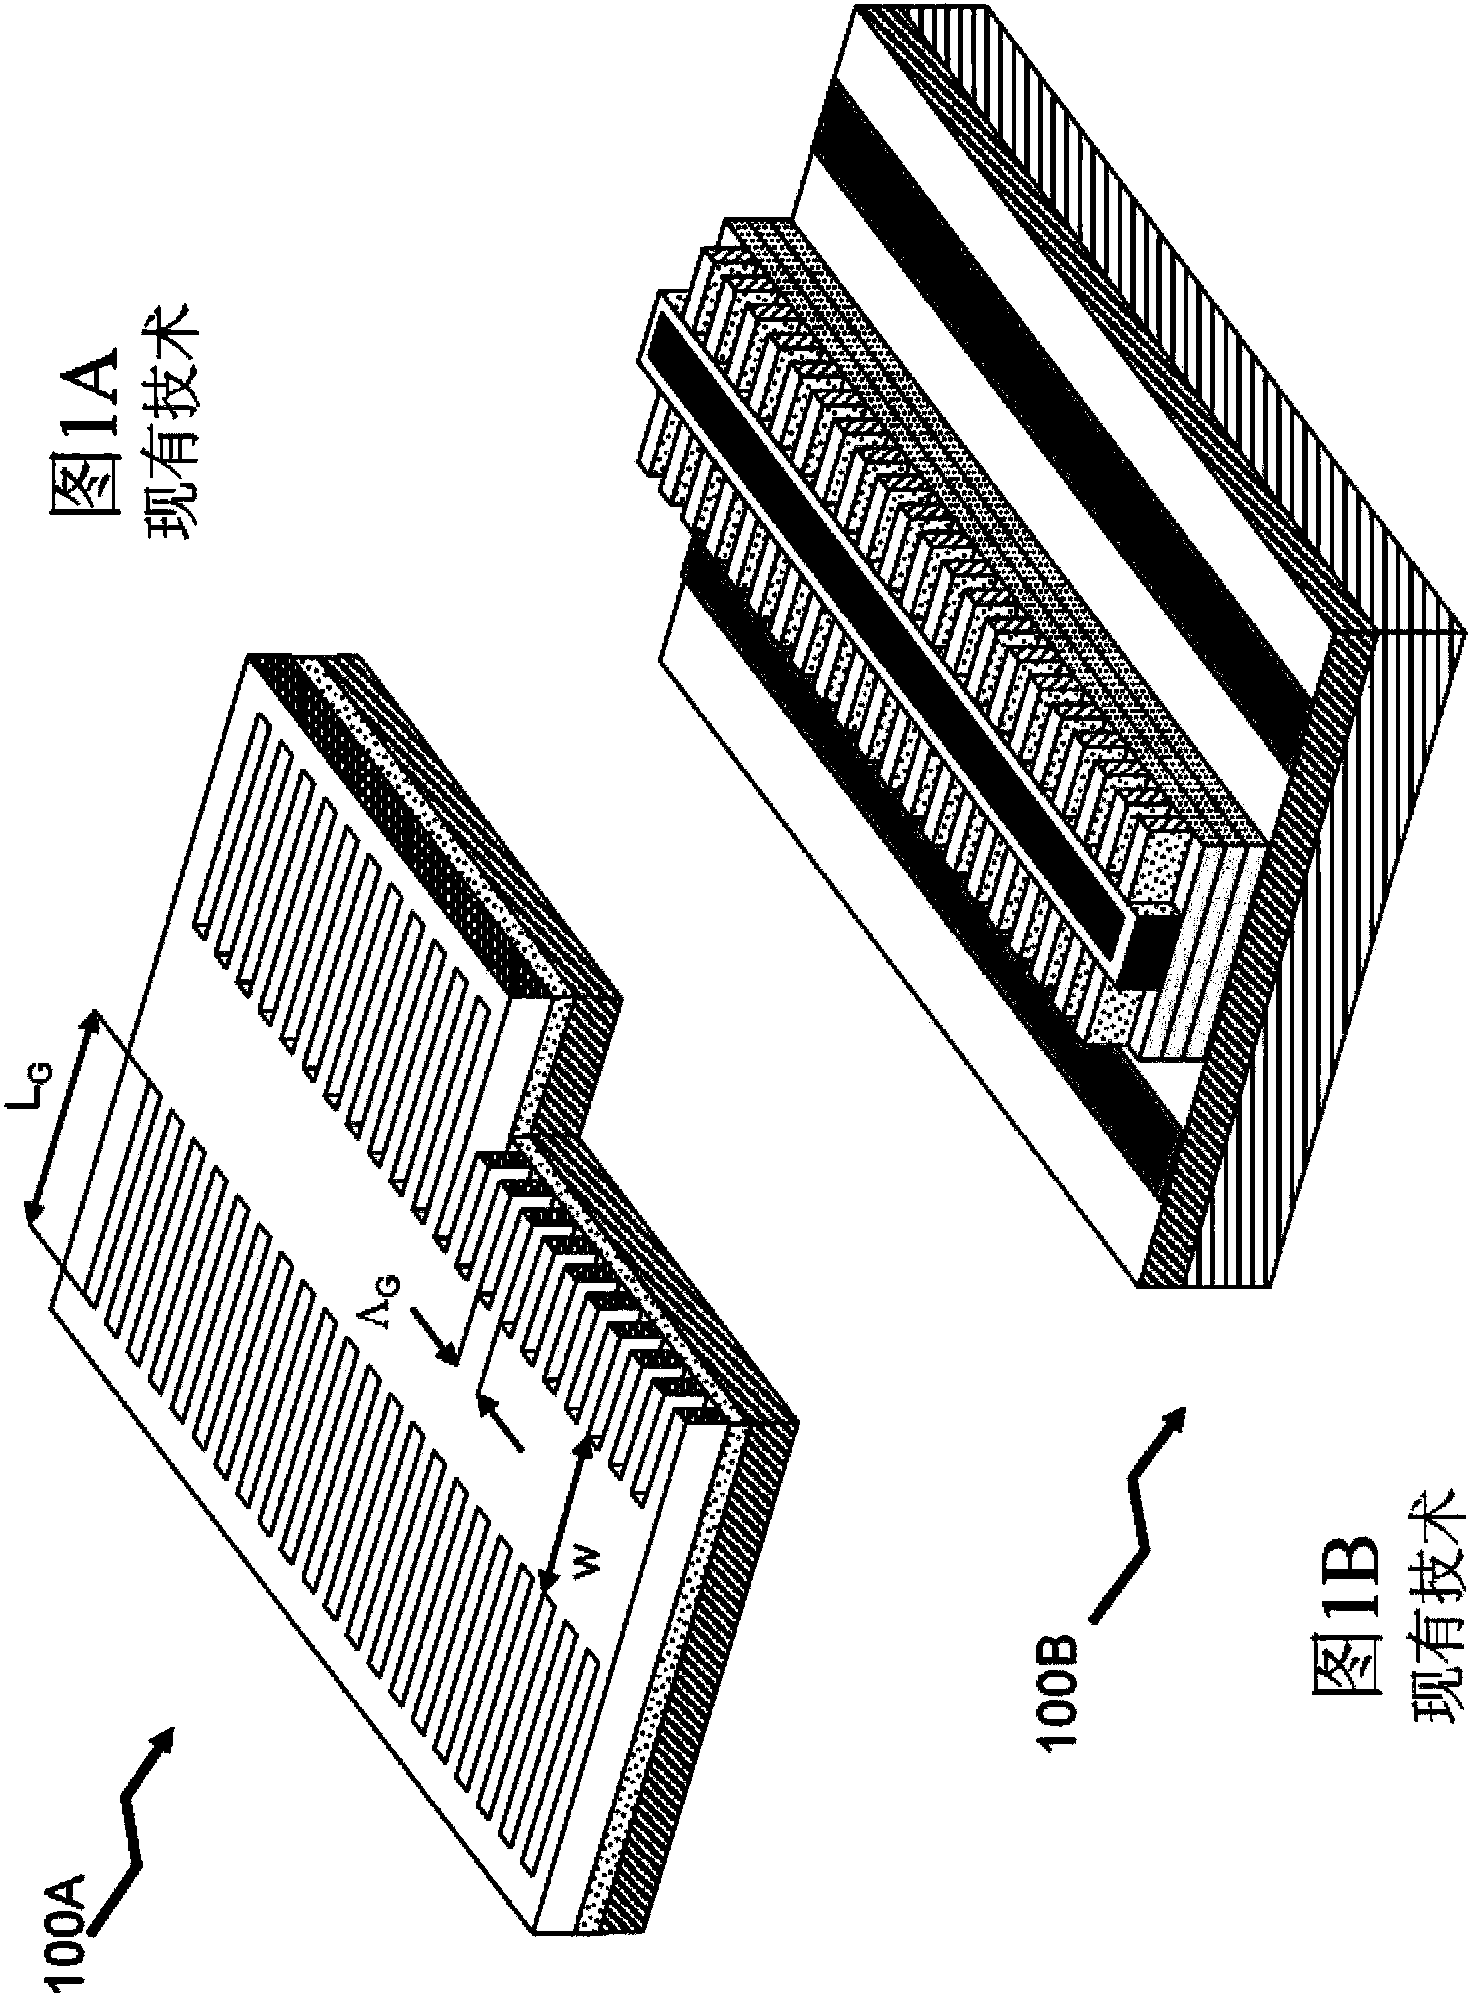 Vertically-coupled surface-etched grating DFB laser